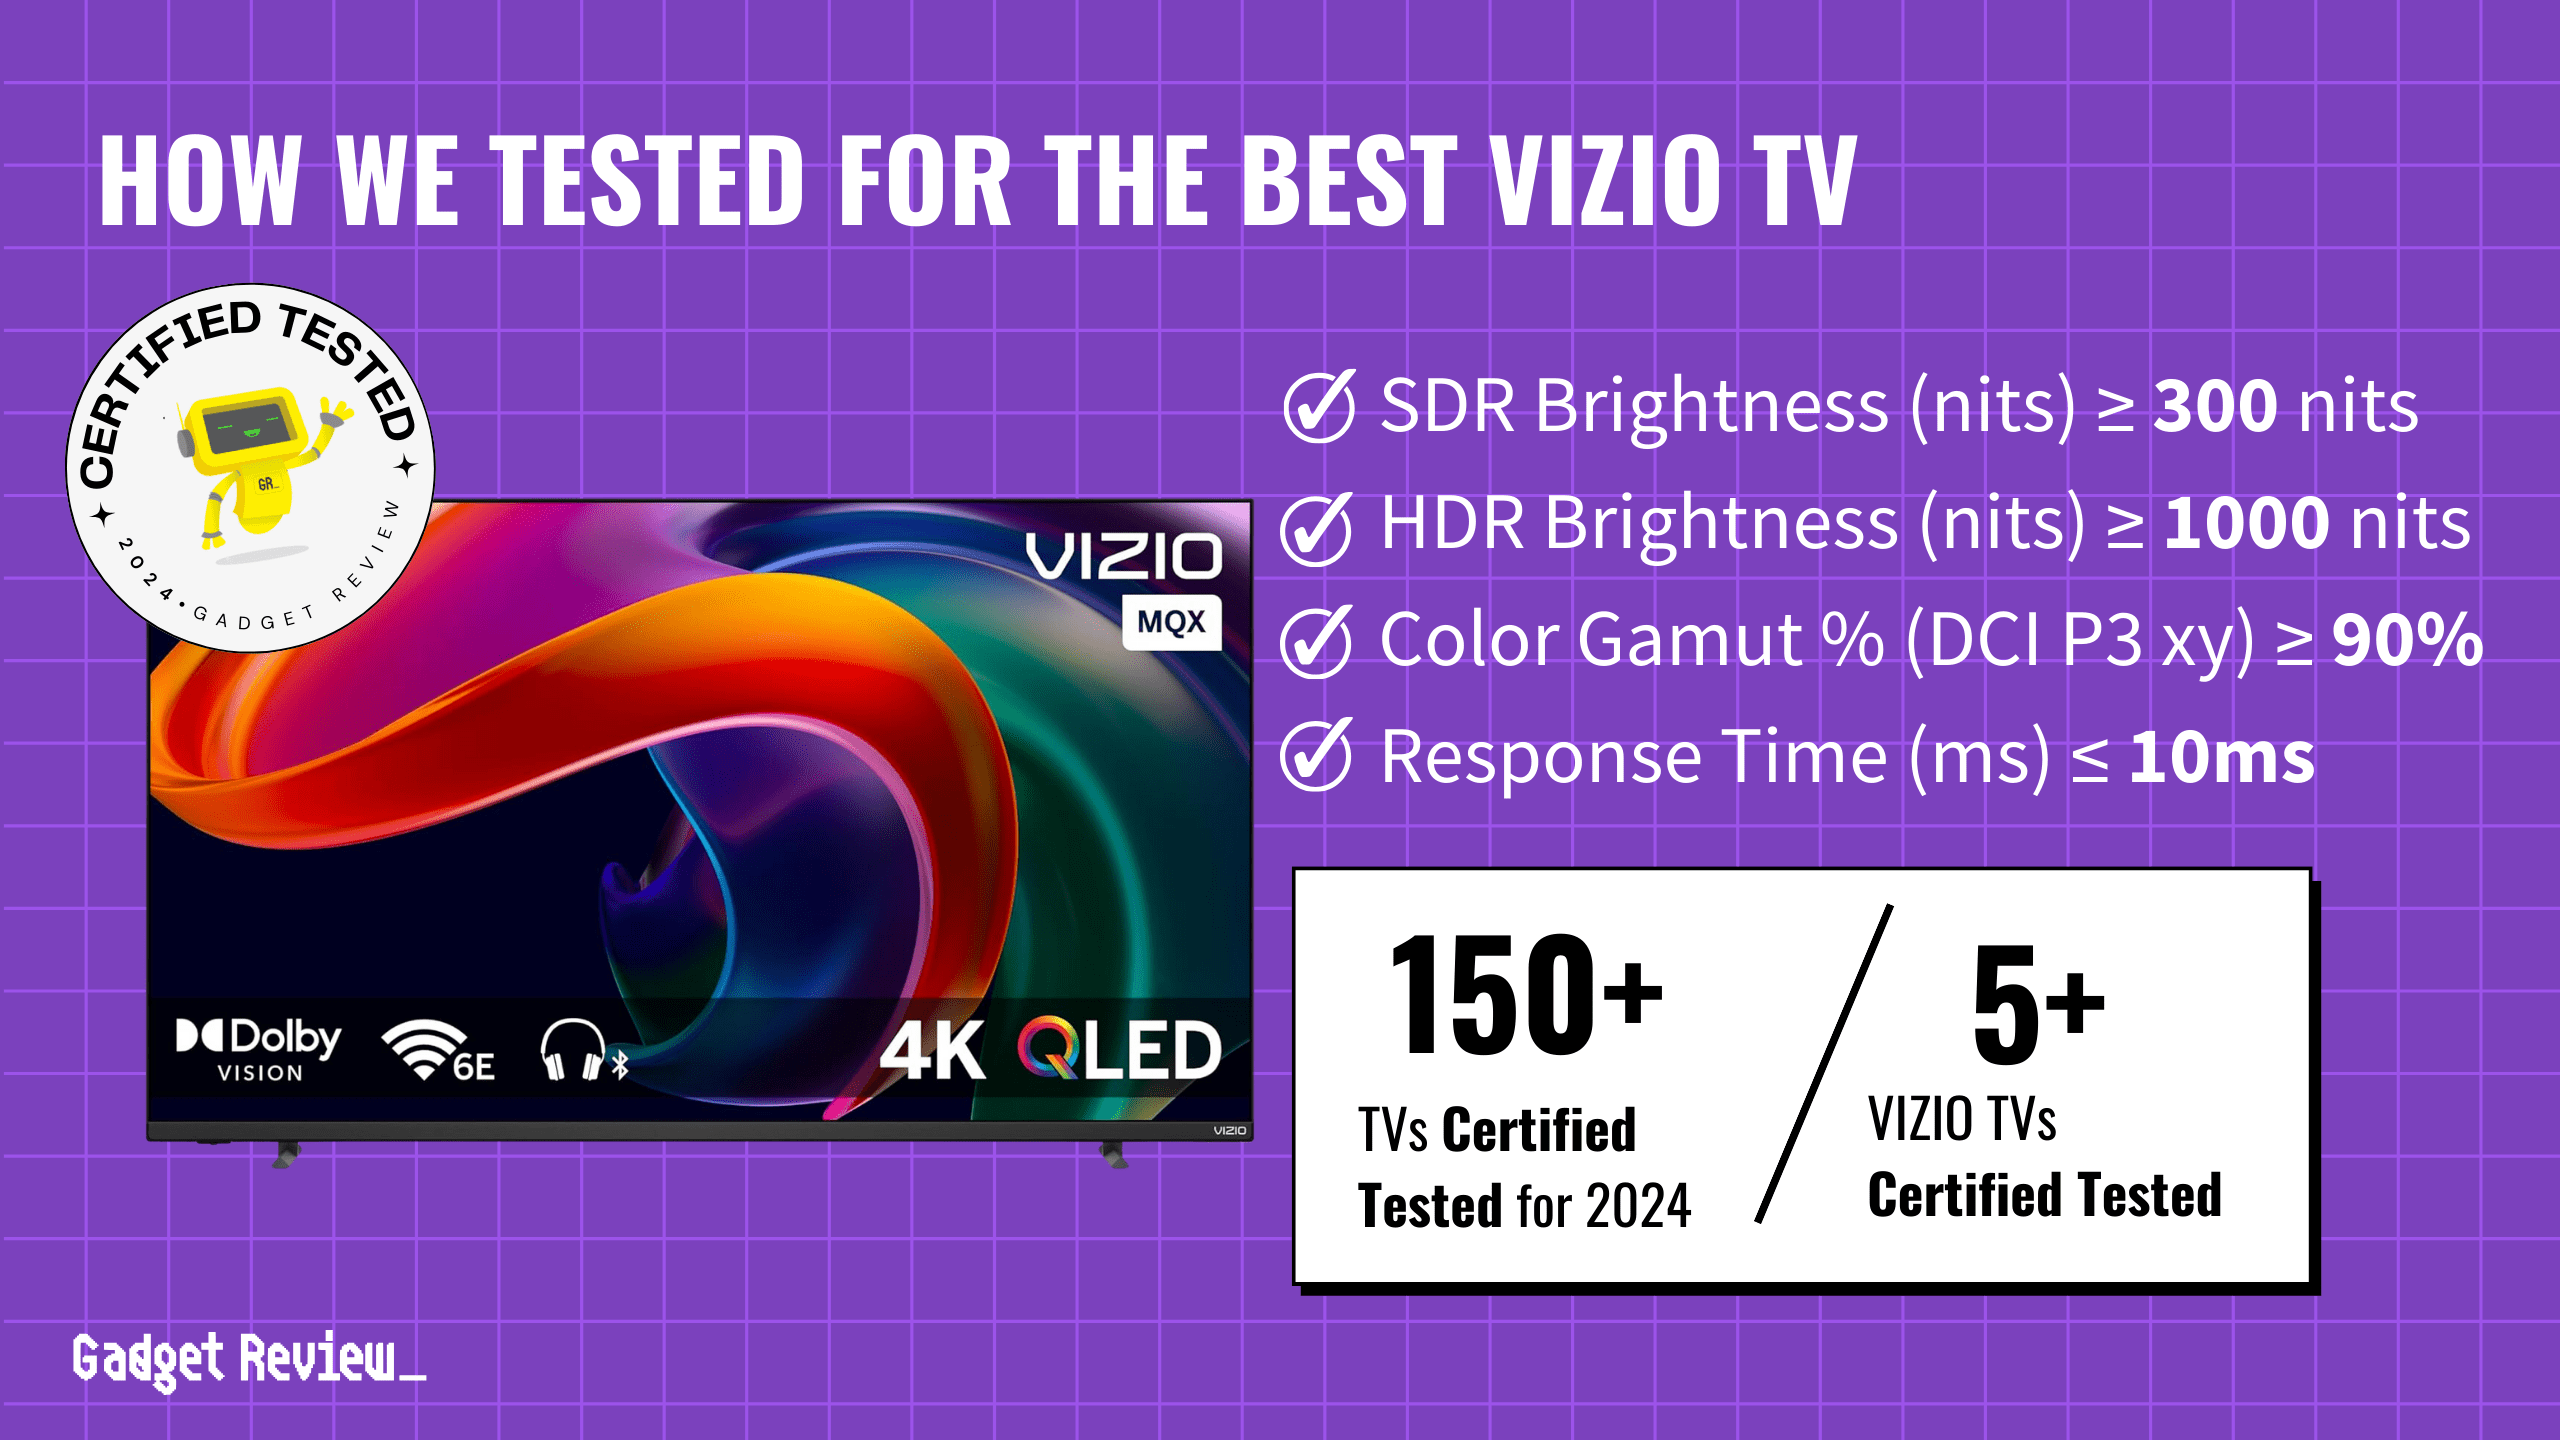 best vizio tv guide that shows the top best tv model